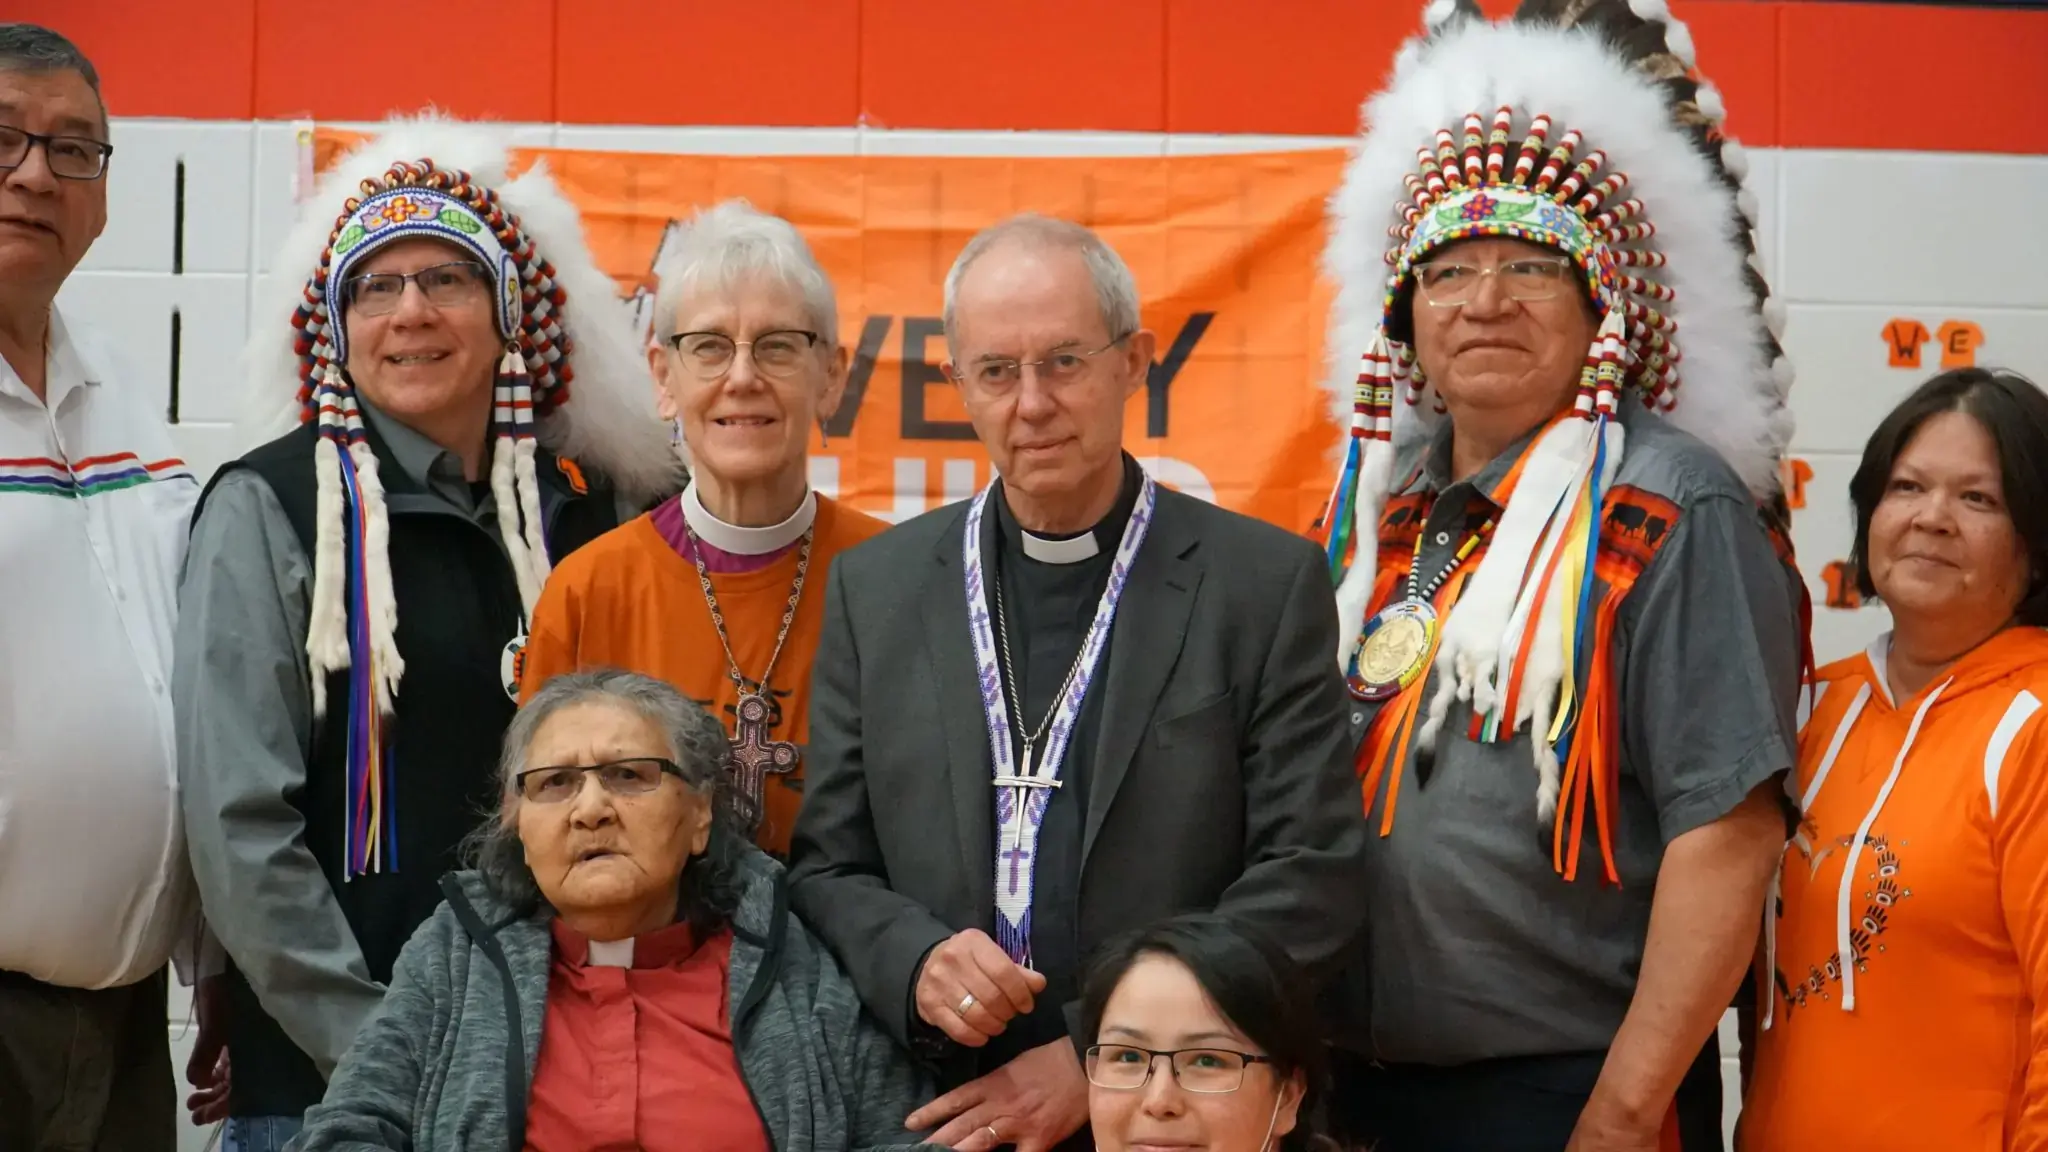 Archbishop of Canterbury Justin Welby, centre, after his apology for the church’s role in the residential school system, April 30th, 2022 at the James Smith Cree Nation, Sask. With him are (top row, l-r): Rob Head, chief, Peter Chapman Band; Archbishop Linda Nicholls, primate, Anglican Church of Canada; Calvin Sanderson, chief, Chakastaypasin Band; and Florence Sanderson, also of the Chakastaypasin Band. The Anglican Journal was not able to identify the two women in the bottom row as of press time